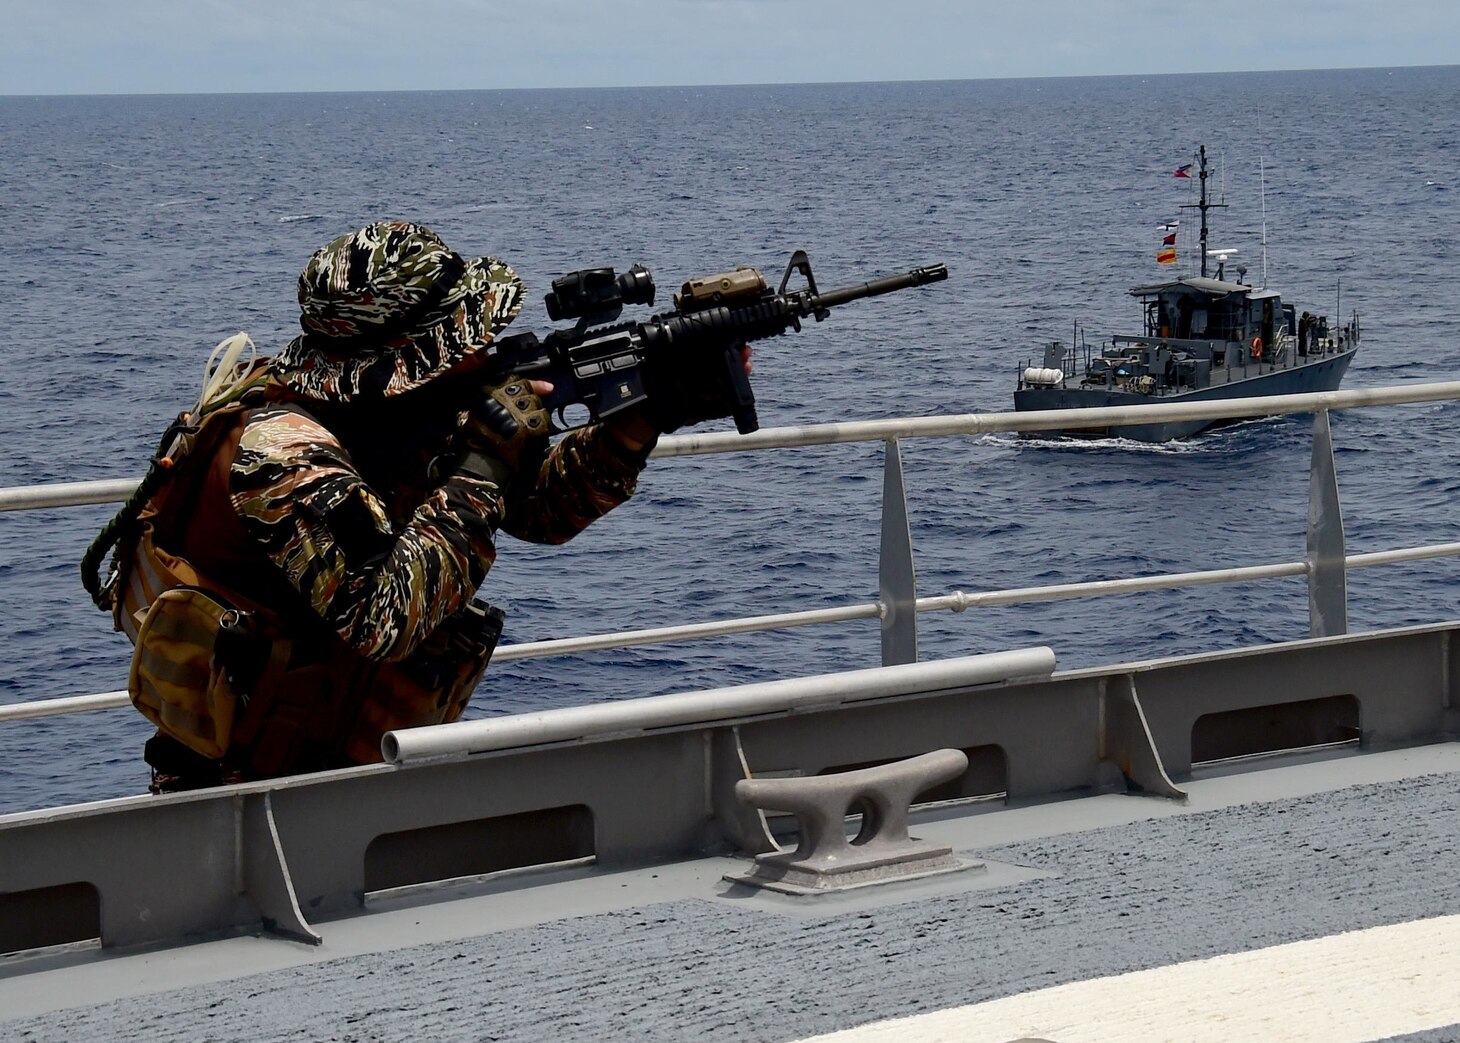 Members of the Philippine Naval Special Operations Group conduct Visit, Board, Search and Seizure (VBSS) aboard USNS Millinocket (T-EPF 3) during South East Asia Cooperation and Training (SEACAT) 2017 in waters off the coast of Puerto Princesa, Philippines, Aug. 30.  2017 is the 16th annual SEACAT exercise and includes participants from the U.S. Coast Guard and Coast Guards and Coastal Patrol Agencies from the Philippines, Singapore, Vietnam, Malaysia, and Indonesia.